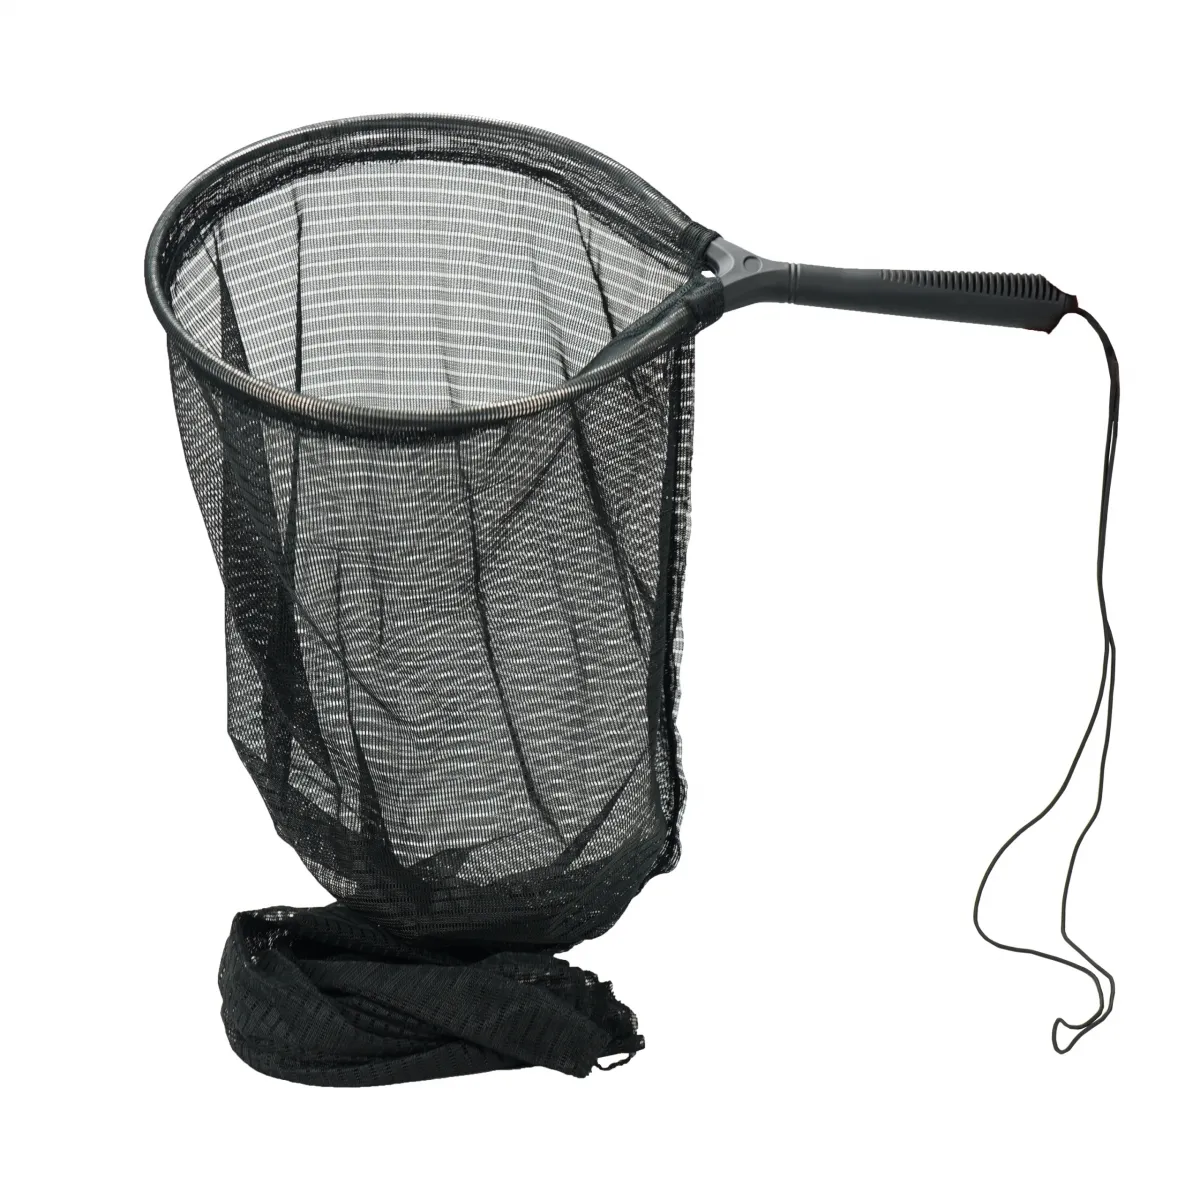 50cm Square Handling Koi Fish Net With 1.5 Meter Retractable Handle For Fish  Pond